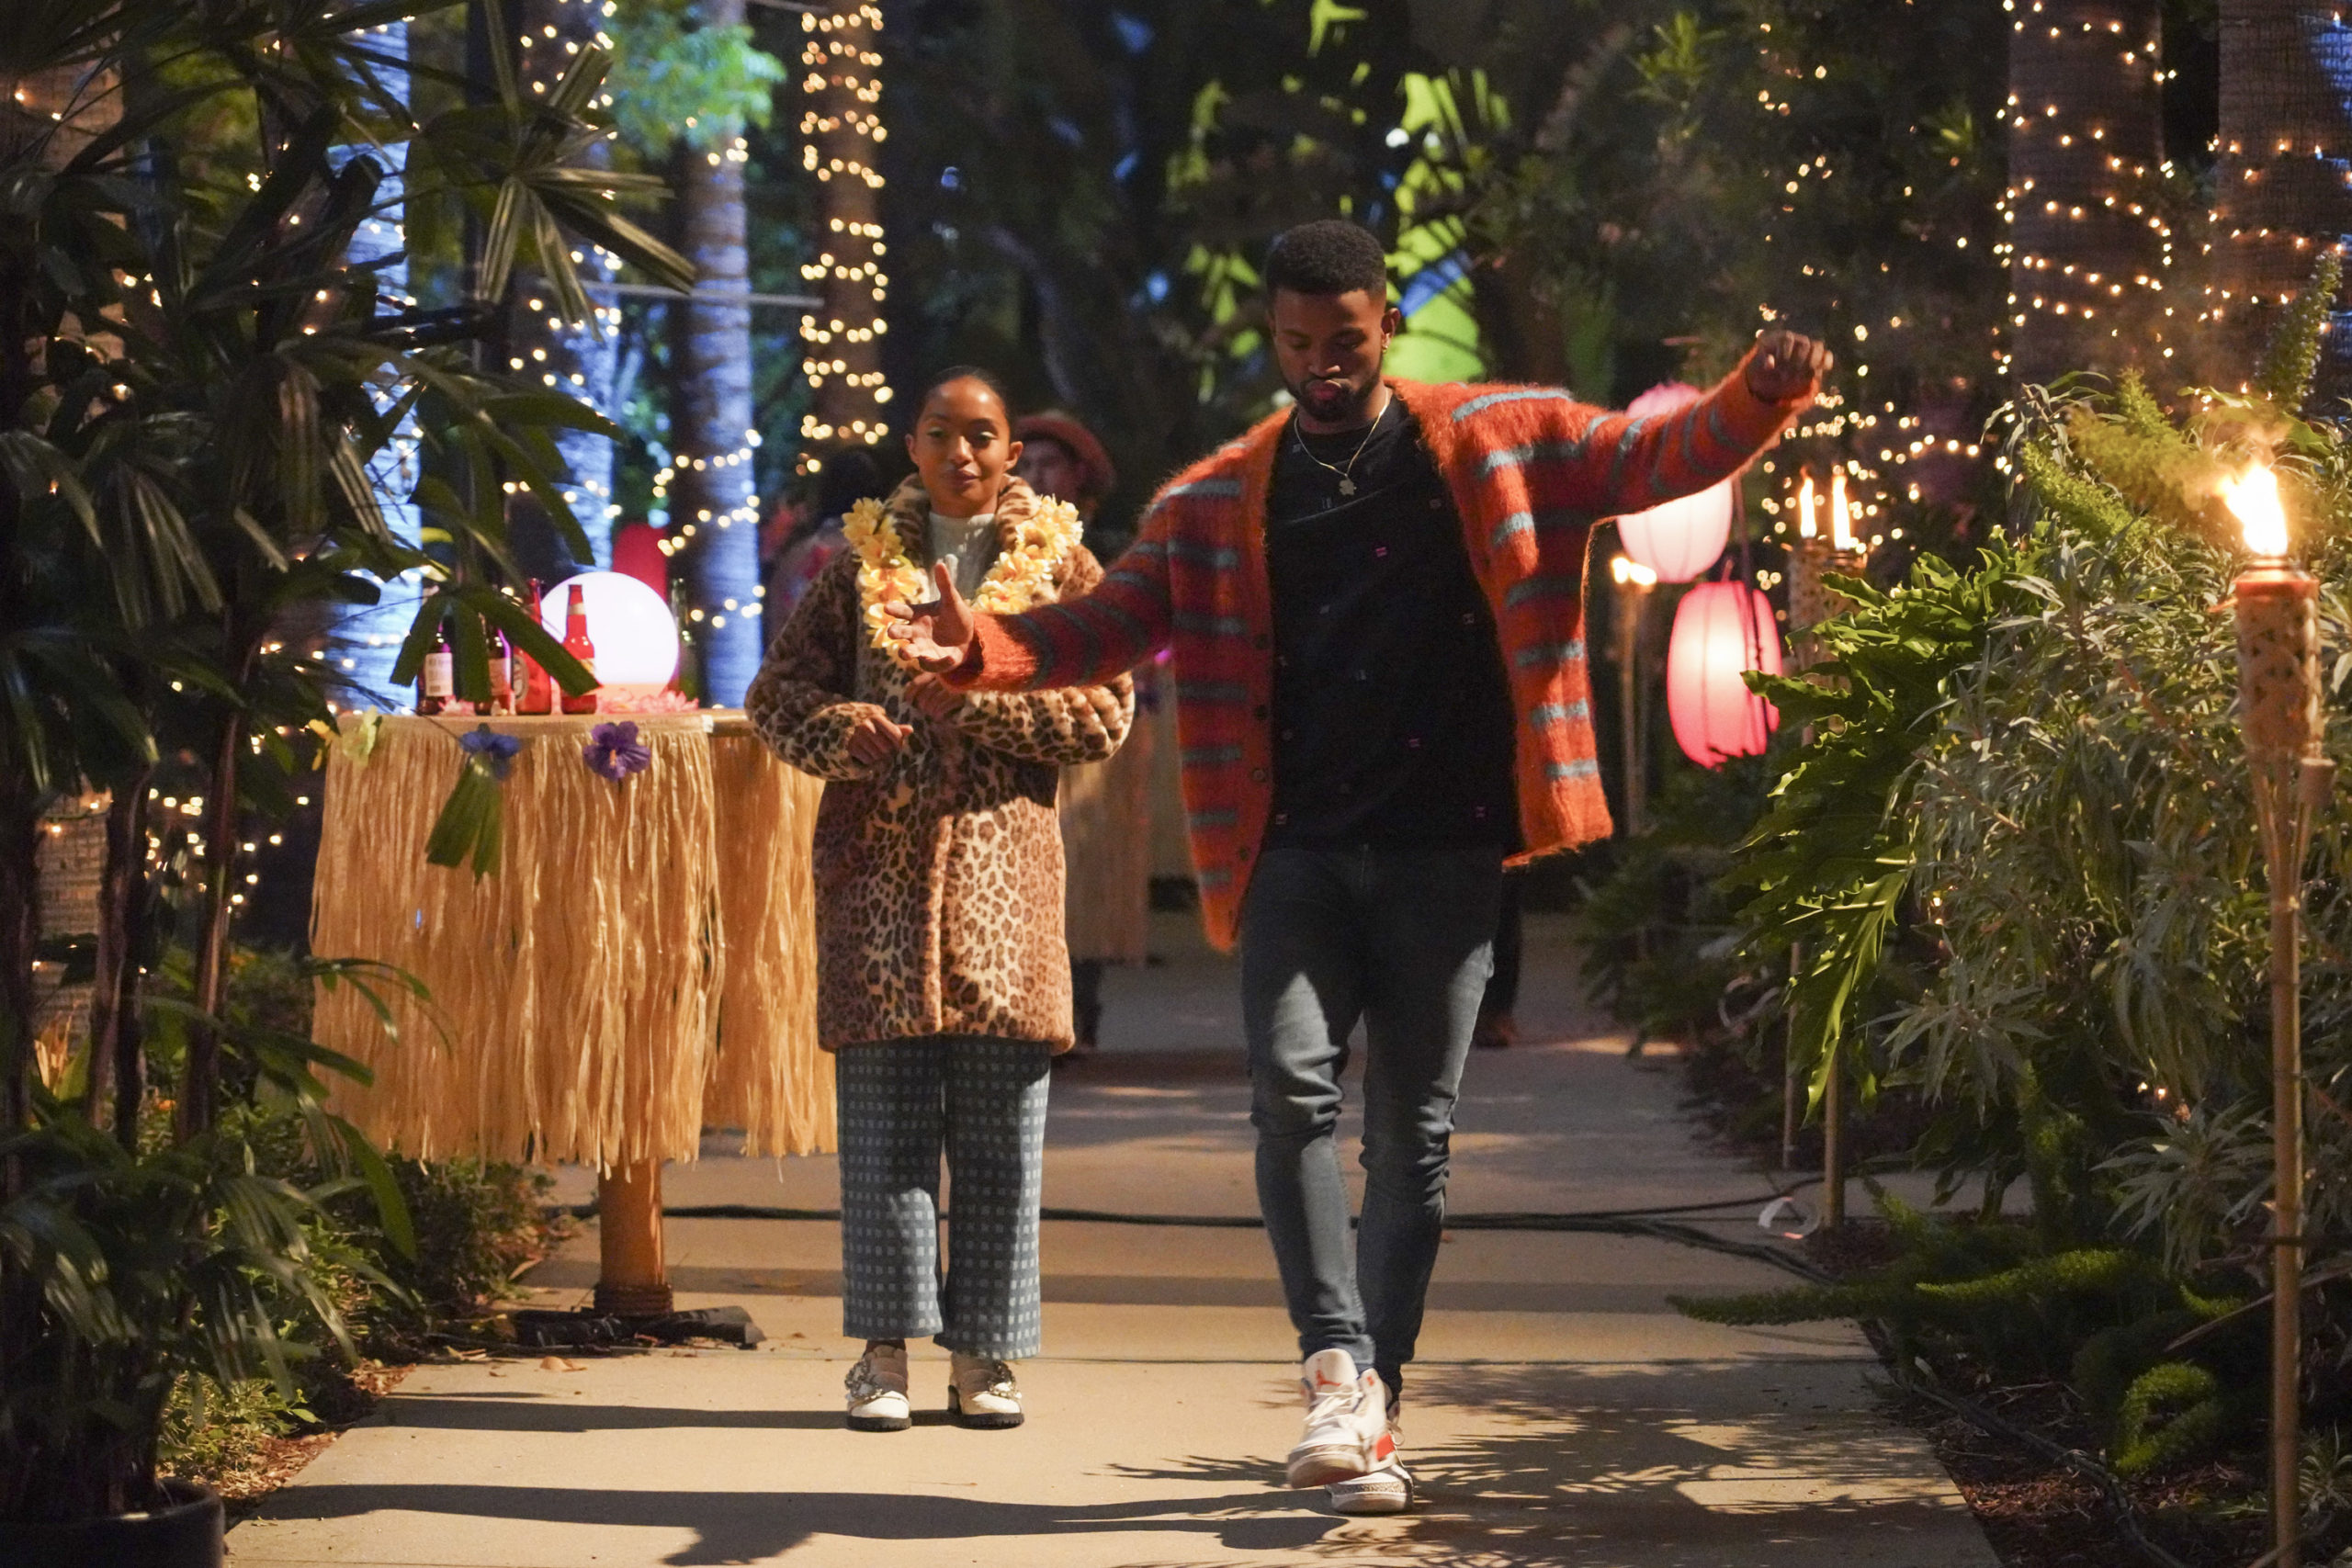 Tensions Rise Between Aaron And Zoey In New Photos From Grown Ish “you Beat Me To The Punch